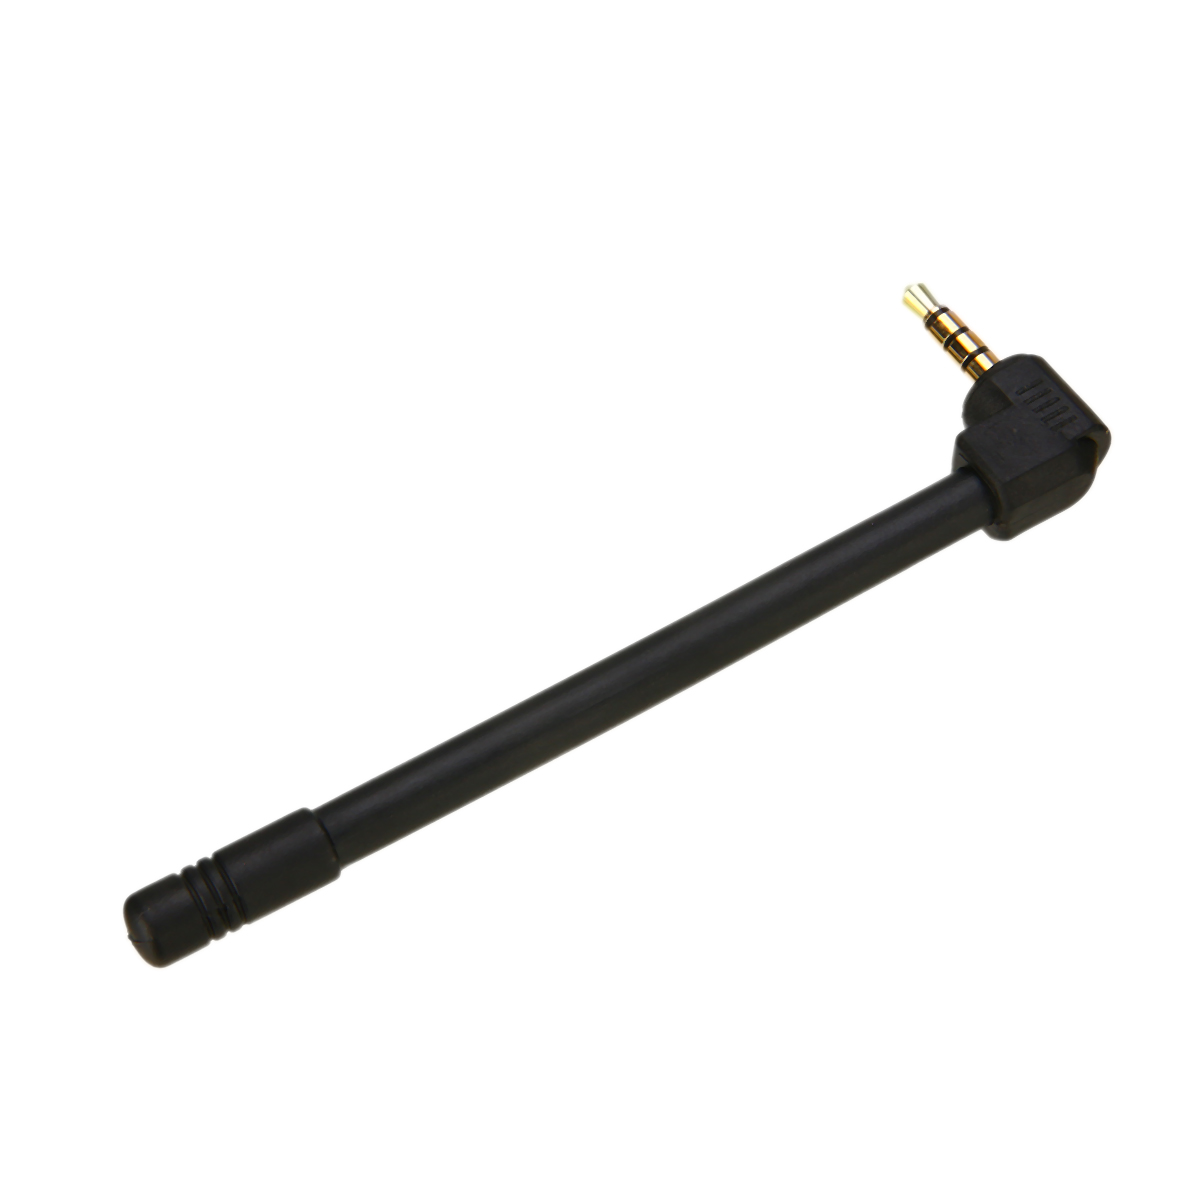 Universal For Mobile Phone External Antenna 3.5mm Male Wireless Antenna Signal Strengthen Booster 5DBI For GPS TV Accessories